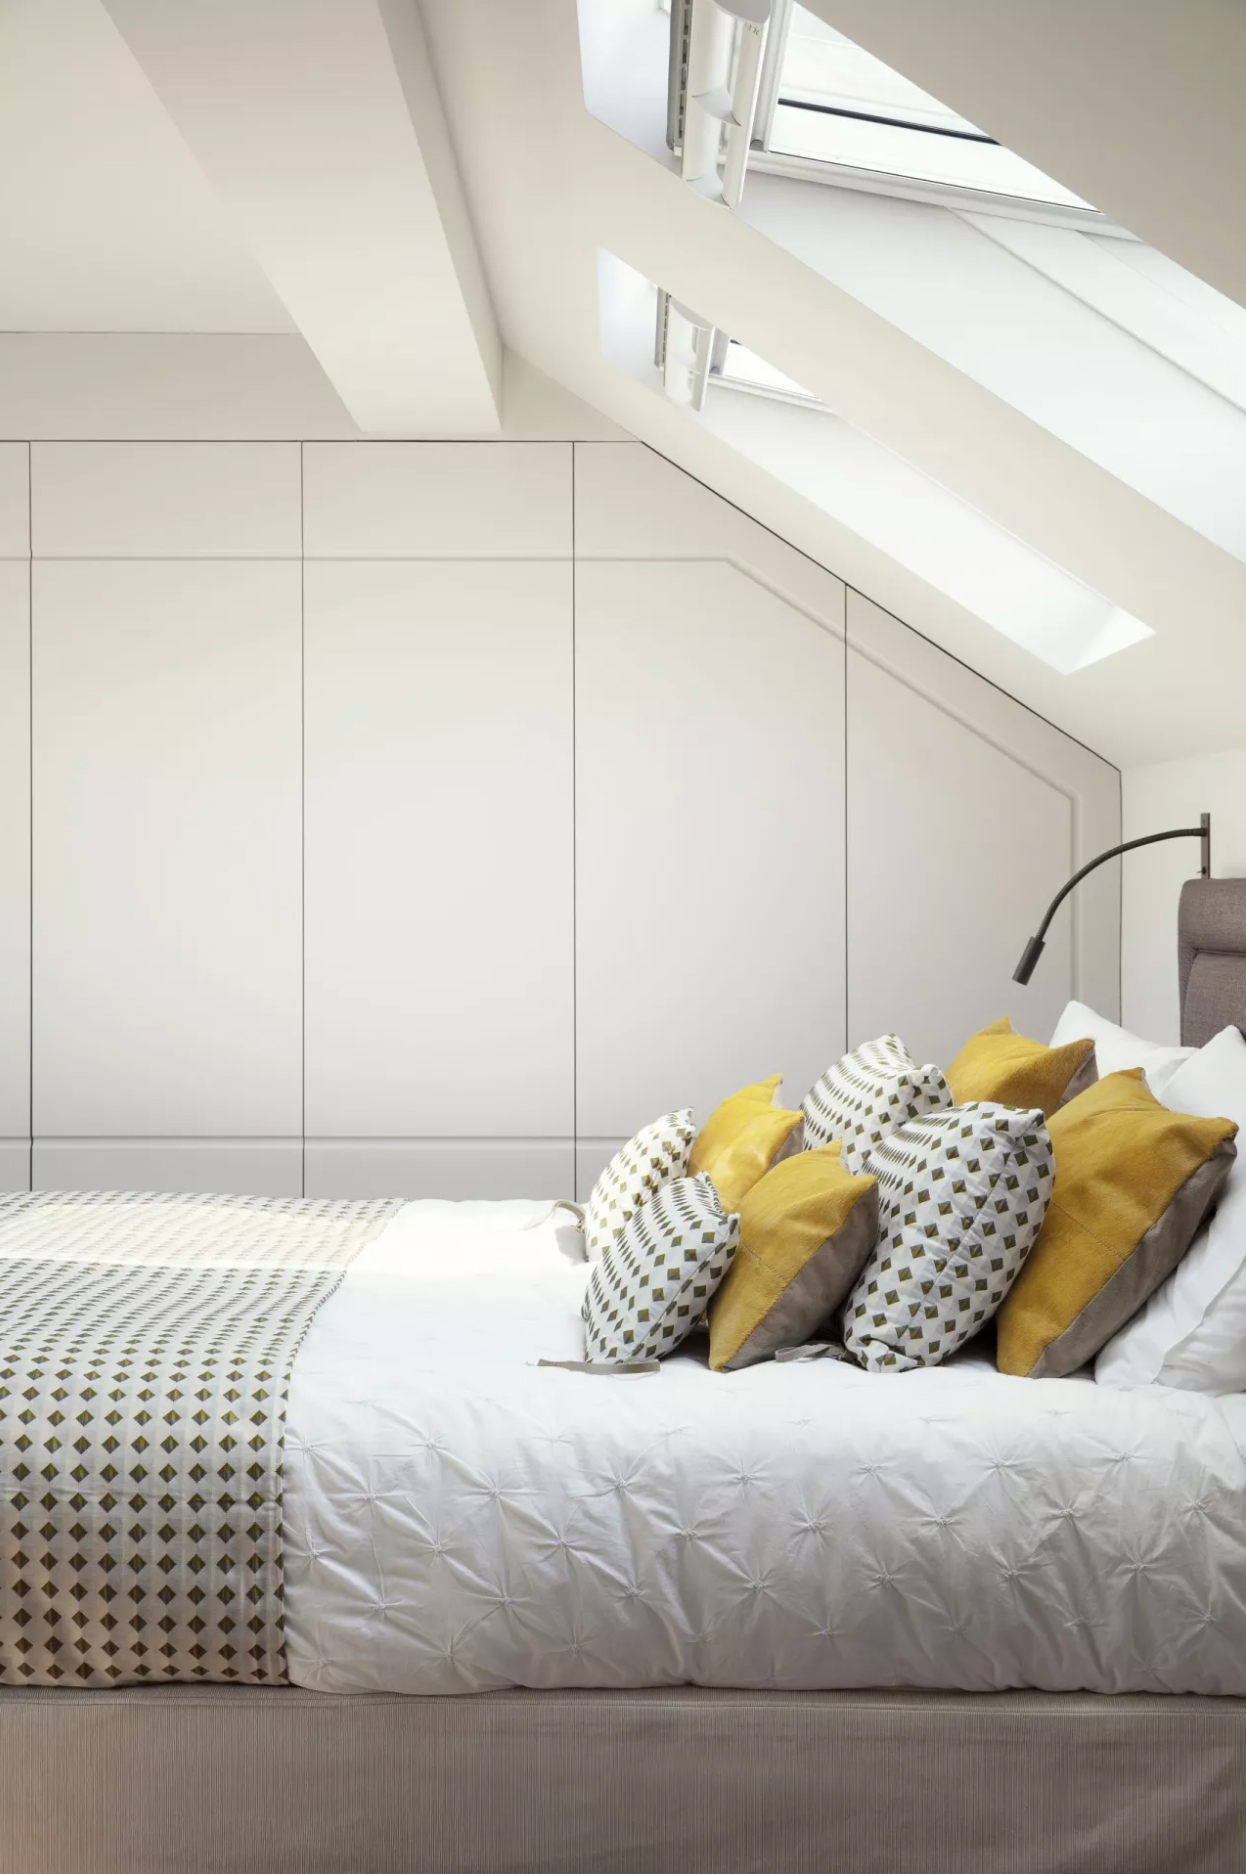 Loft bedroom with built in storage under the eaves